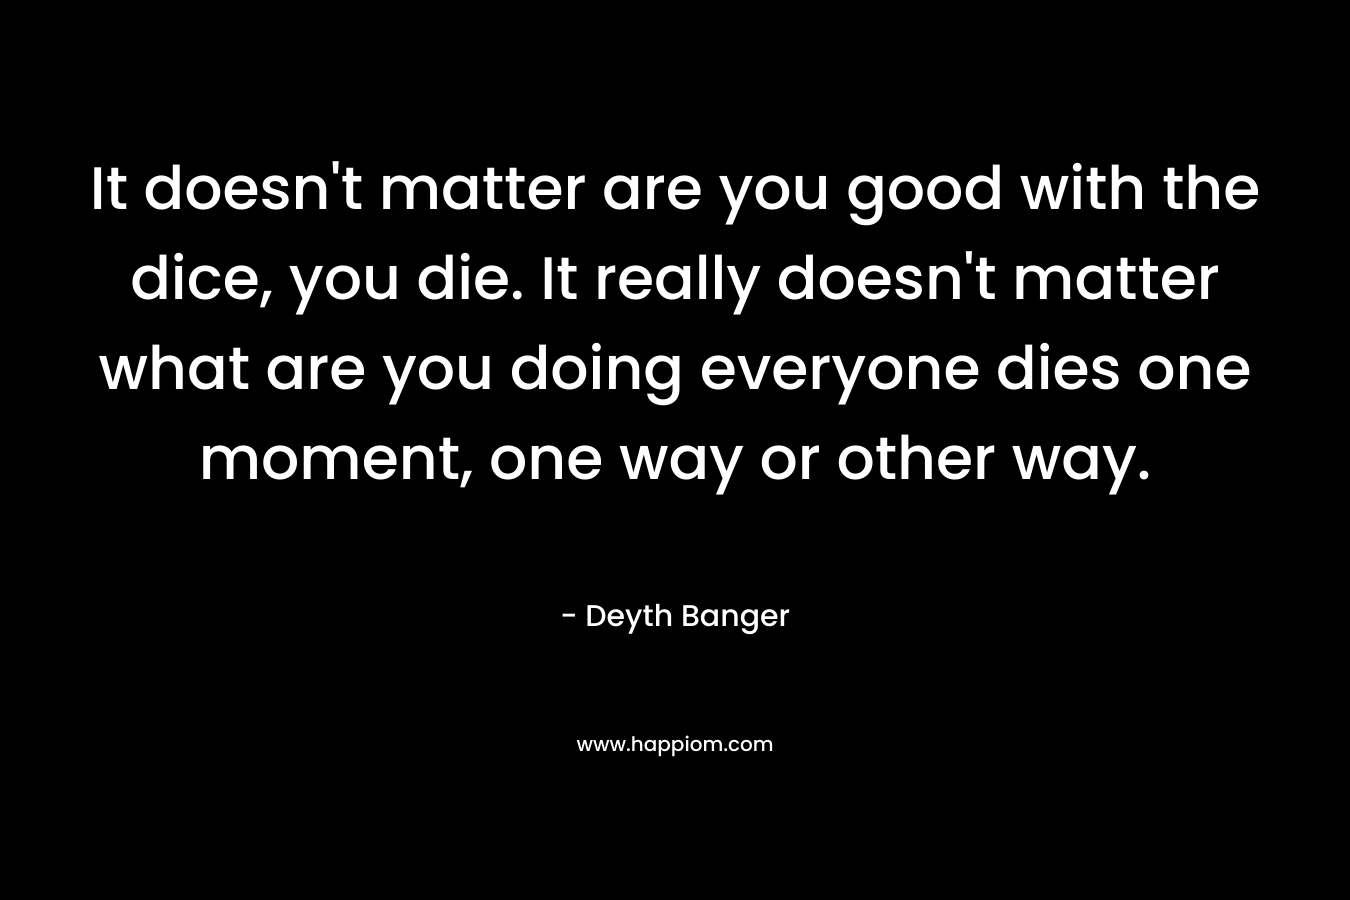 It doesn’t matter are you good with the dice, you die. It really doesn’t matter what are you doing everyone dies one moment, one way or other way. – Deyth Banger